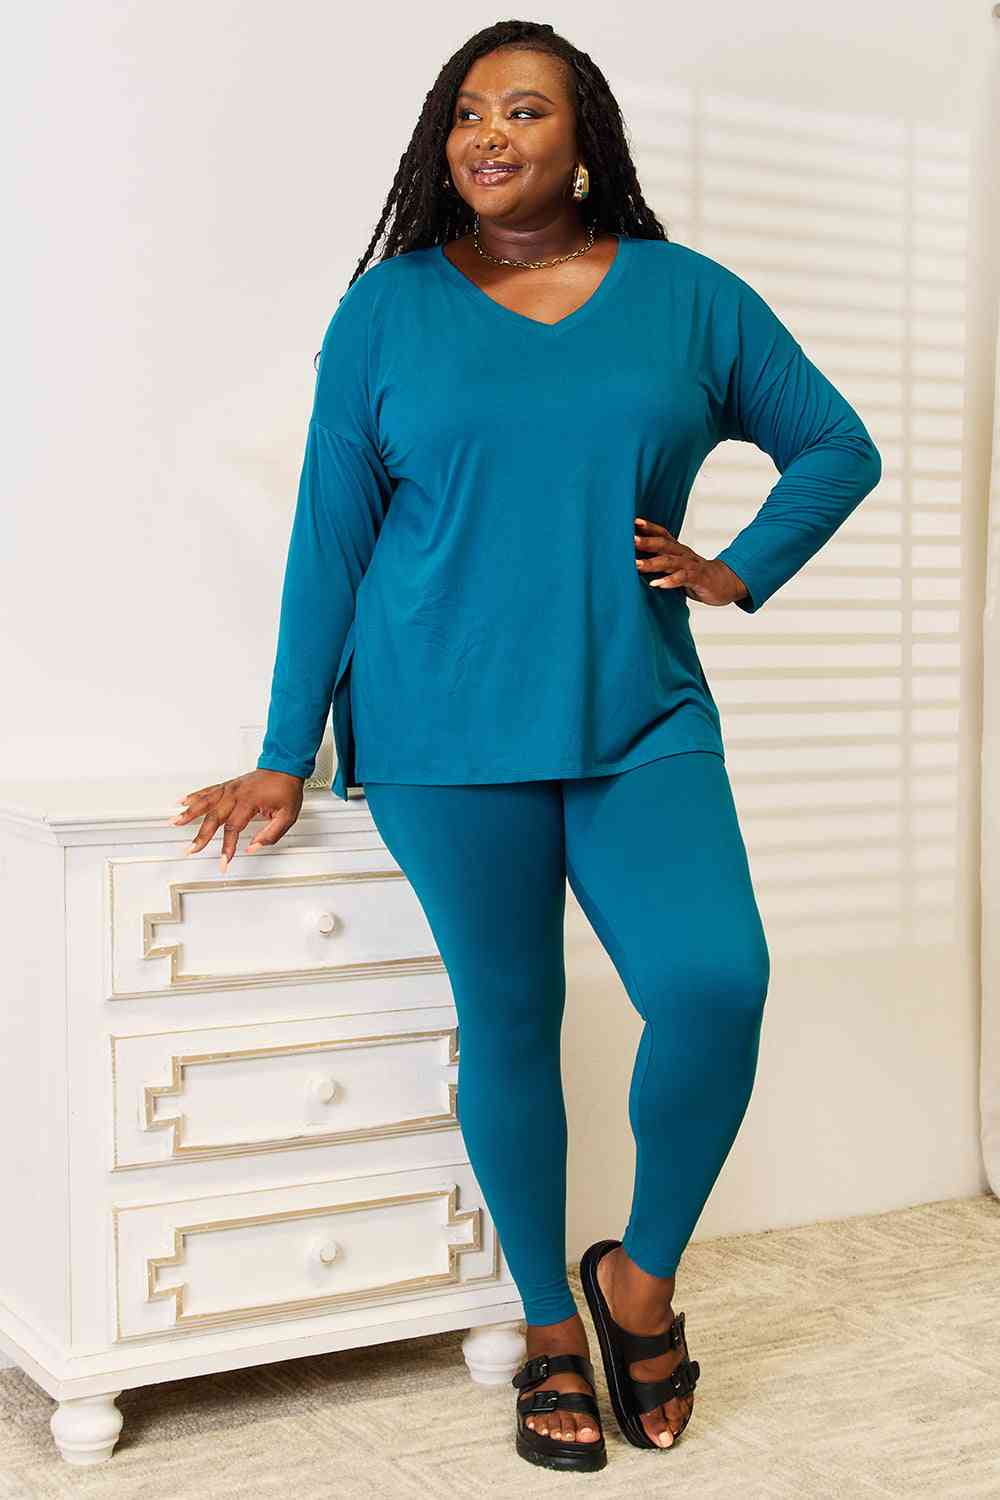 Lazy Days Full Size Long Sleeve Top and Leggings Set - Deep Teal / S - Camis & Tops - Outfit Sets - 1 - 2024